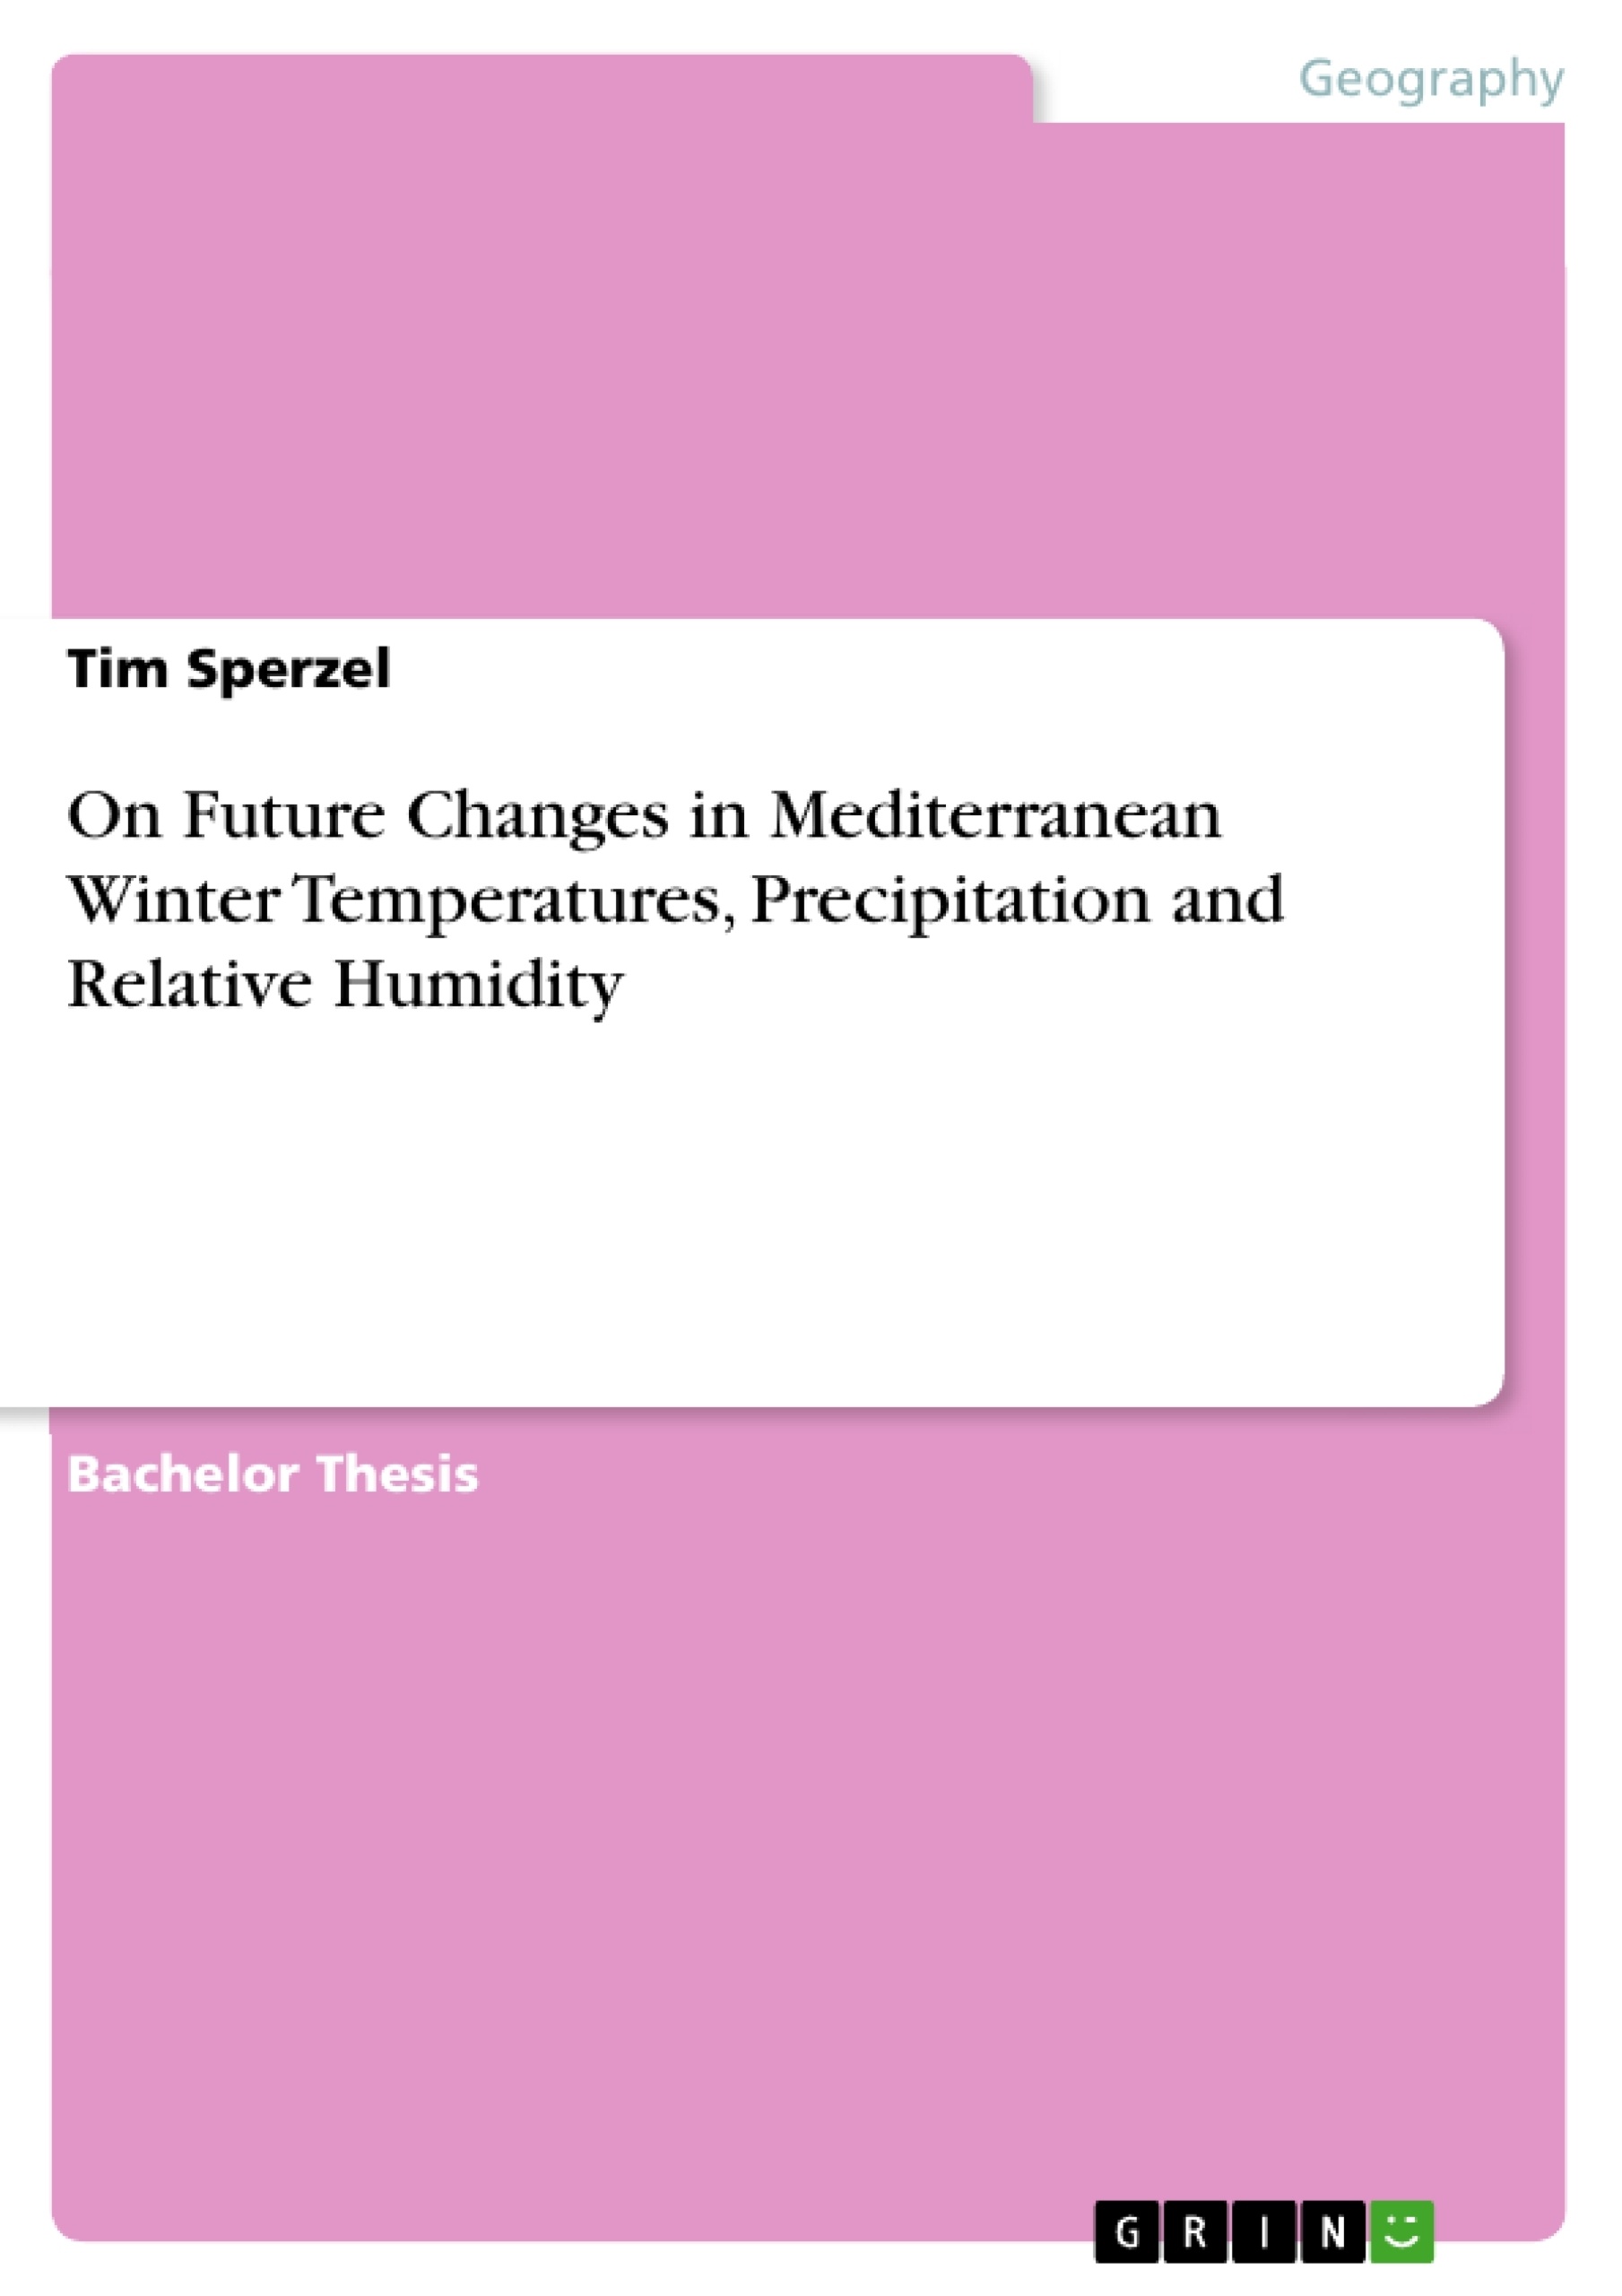 Título: On Future Changes in Mediterranean Winter Temperatures, Precipitation and Relative Humidity